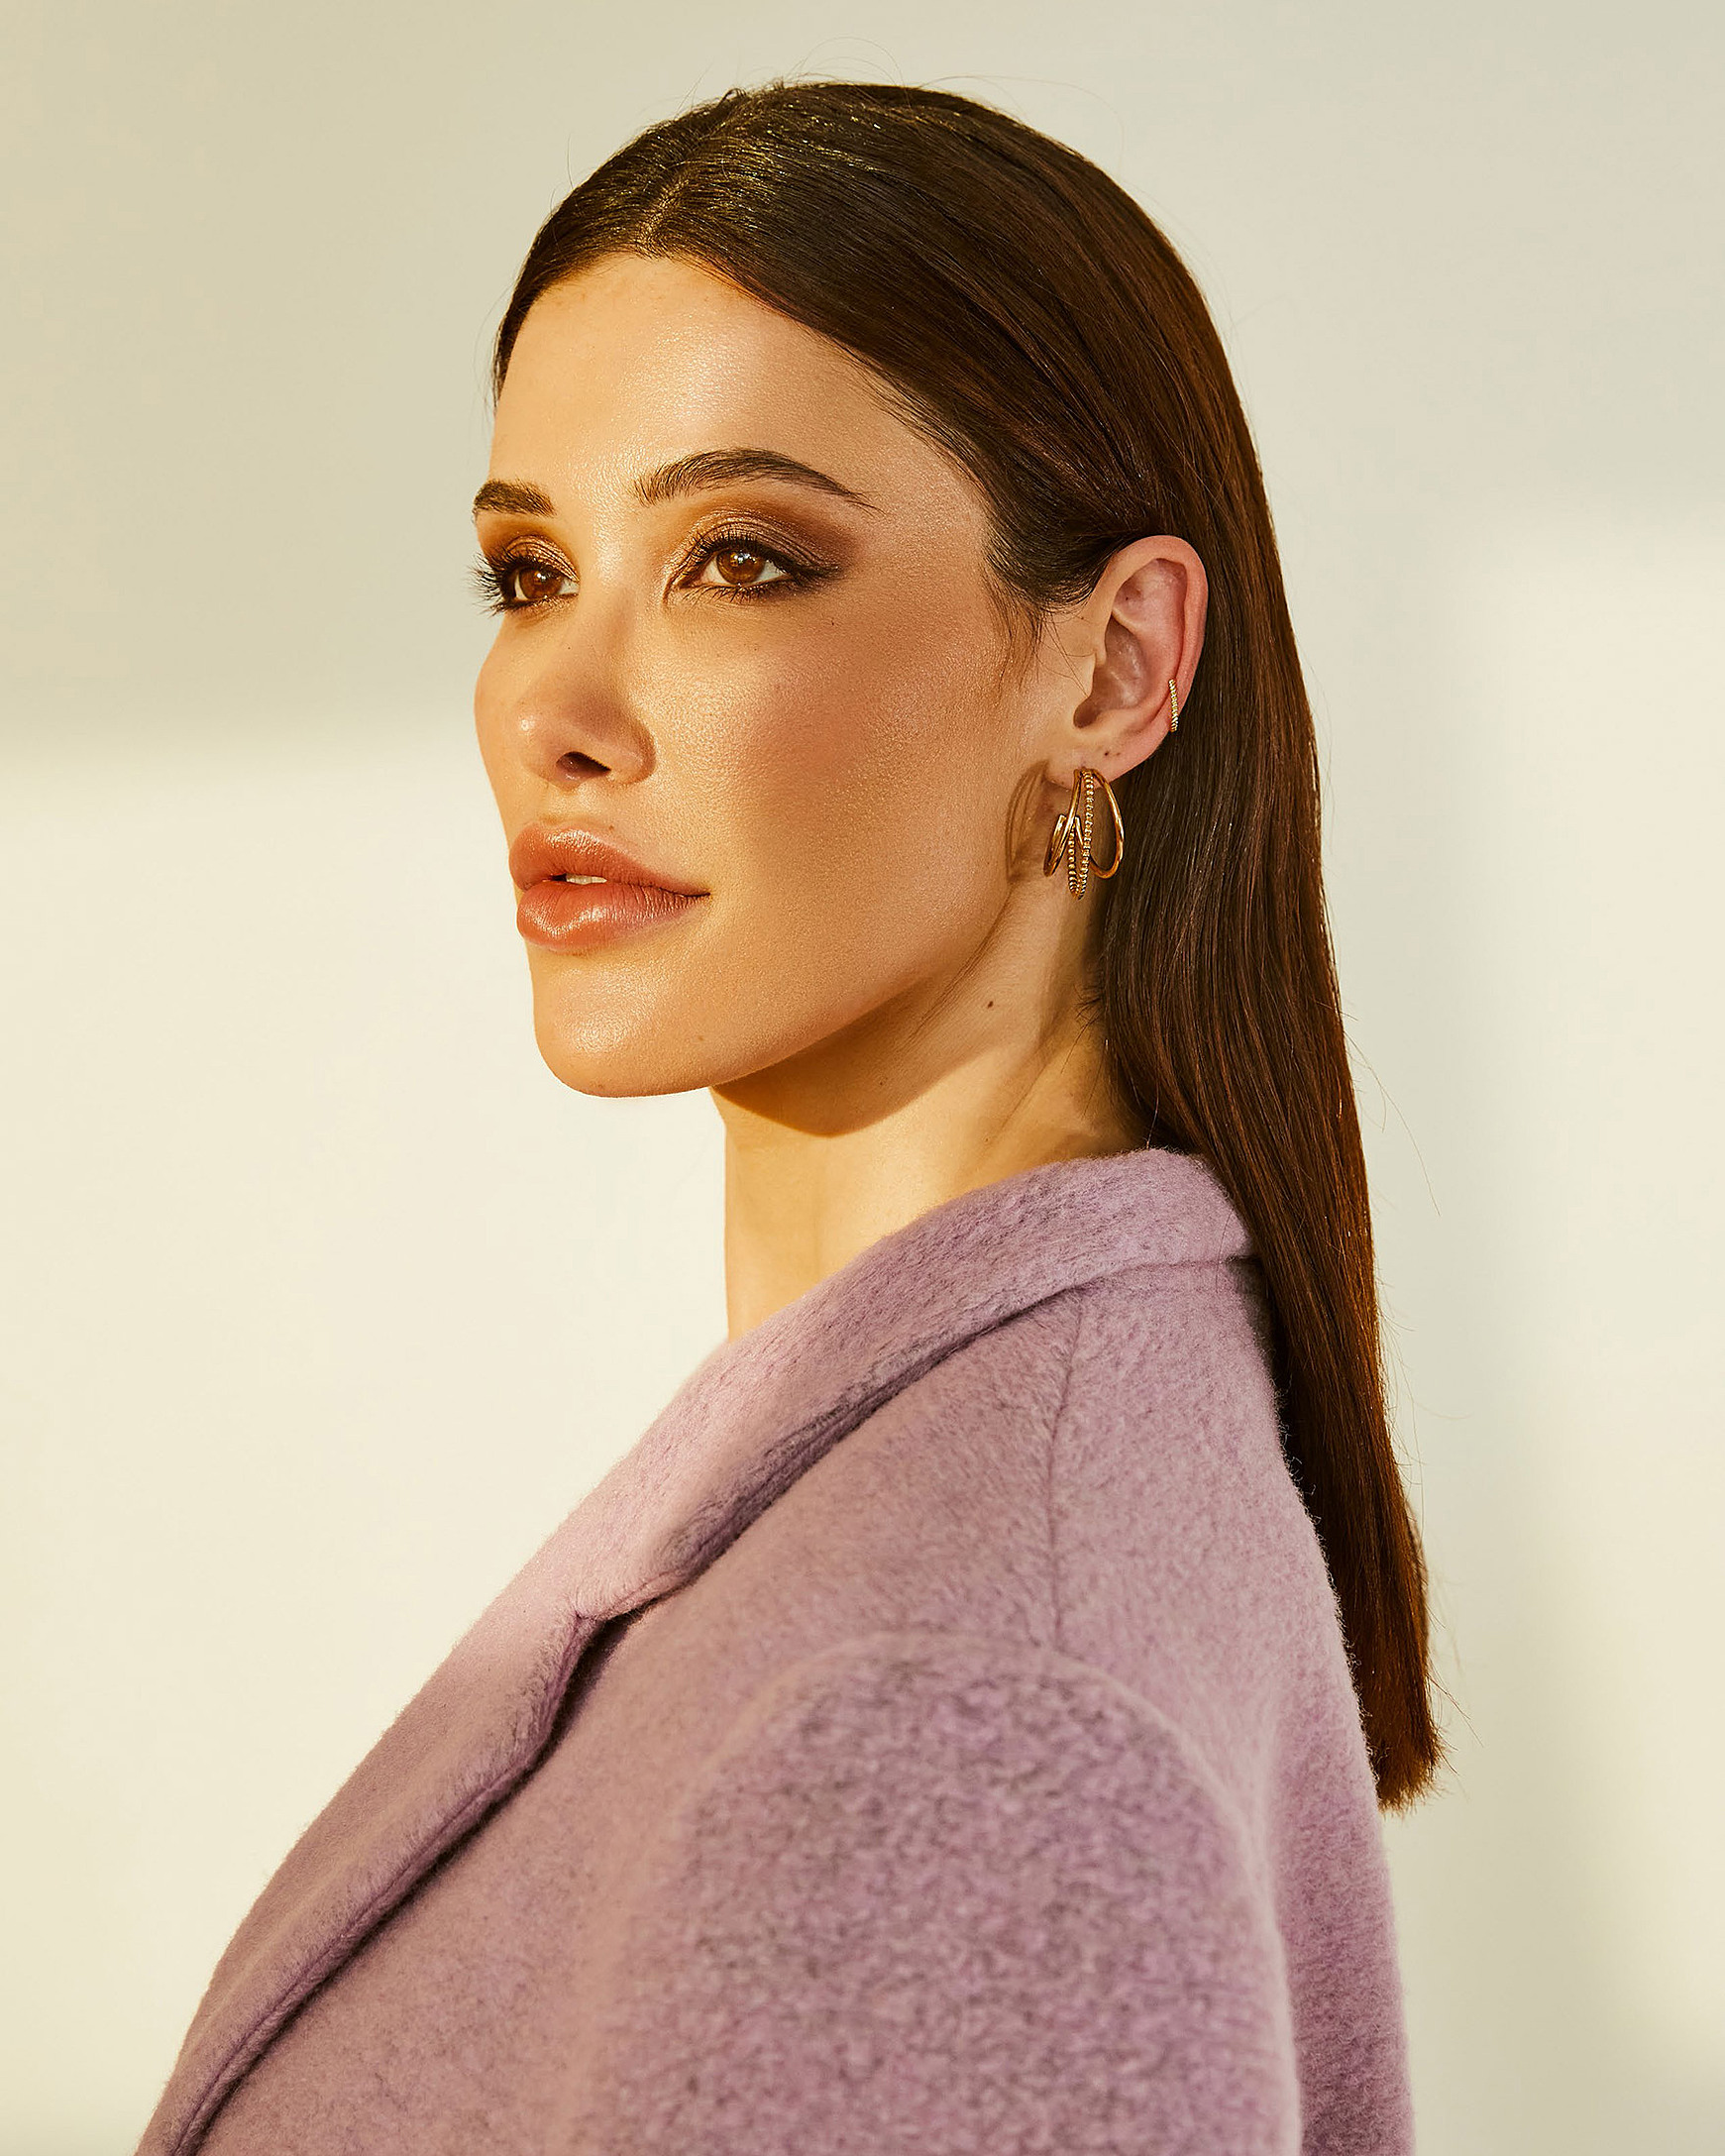 A portrait of the model in the lilac coat